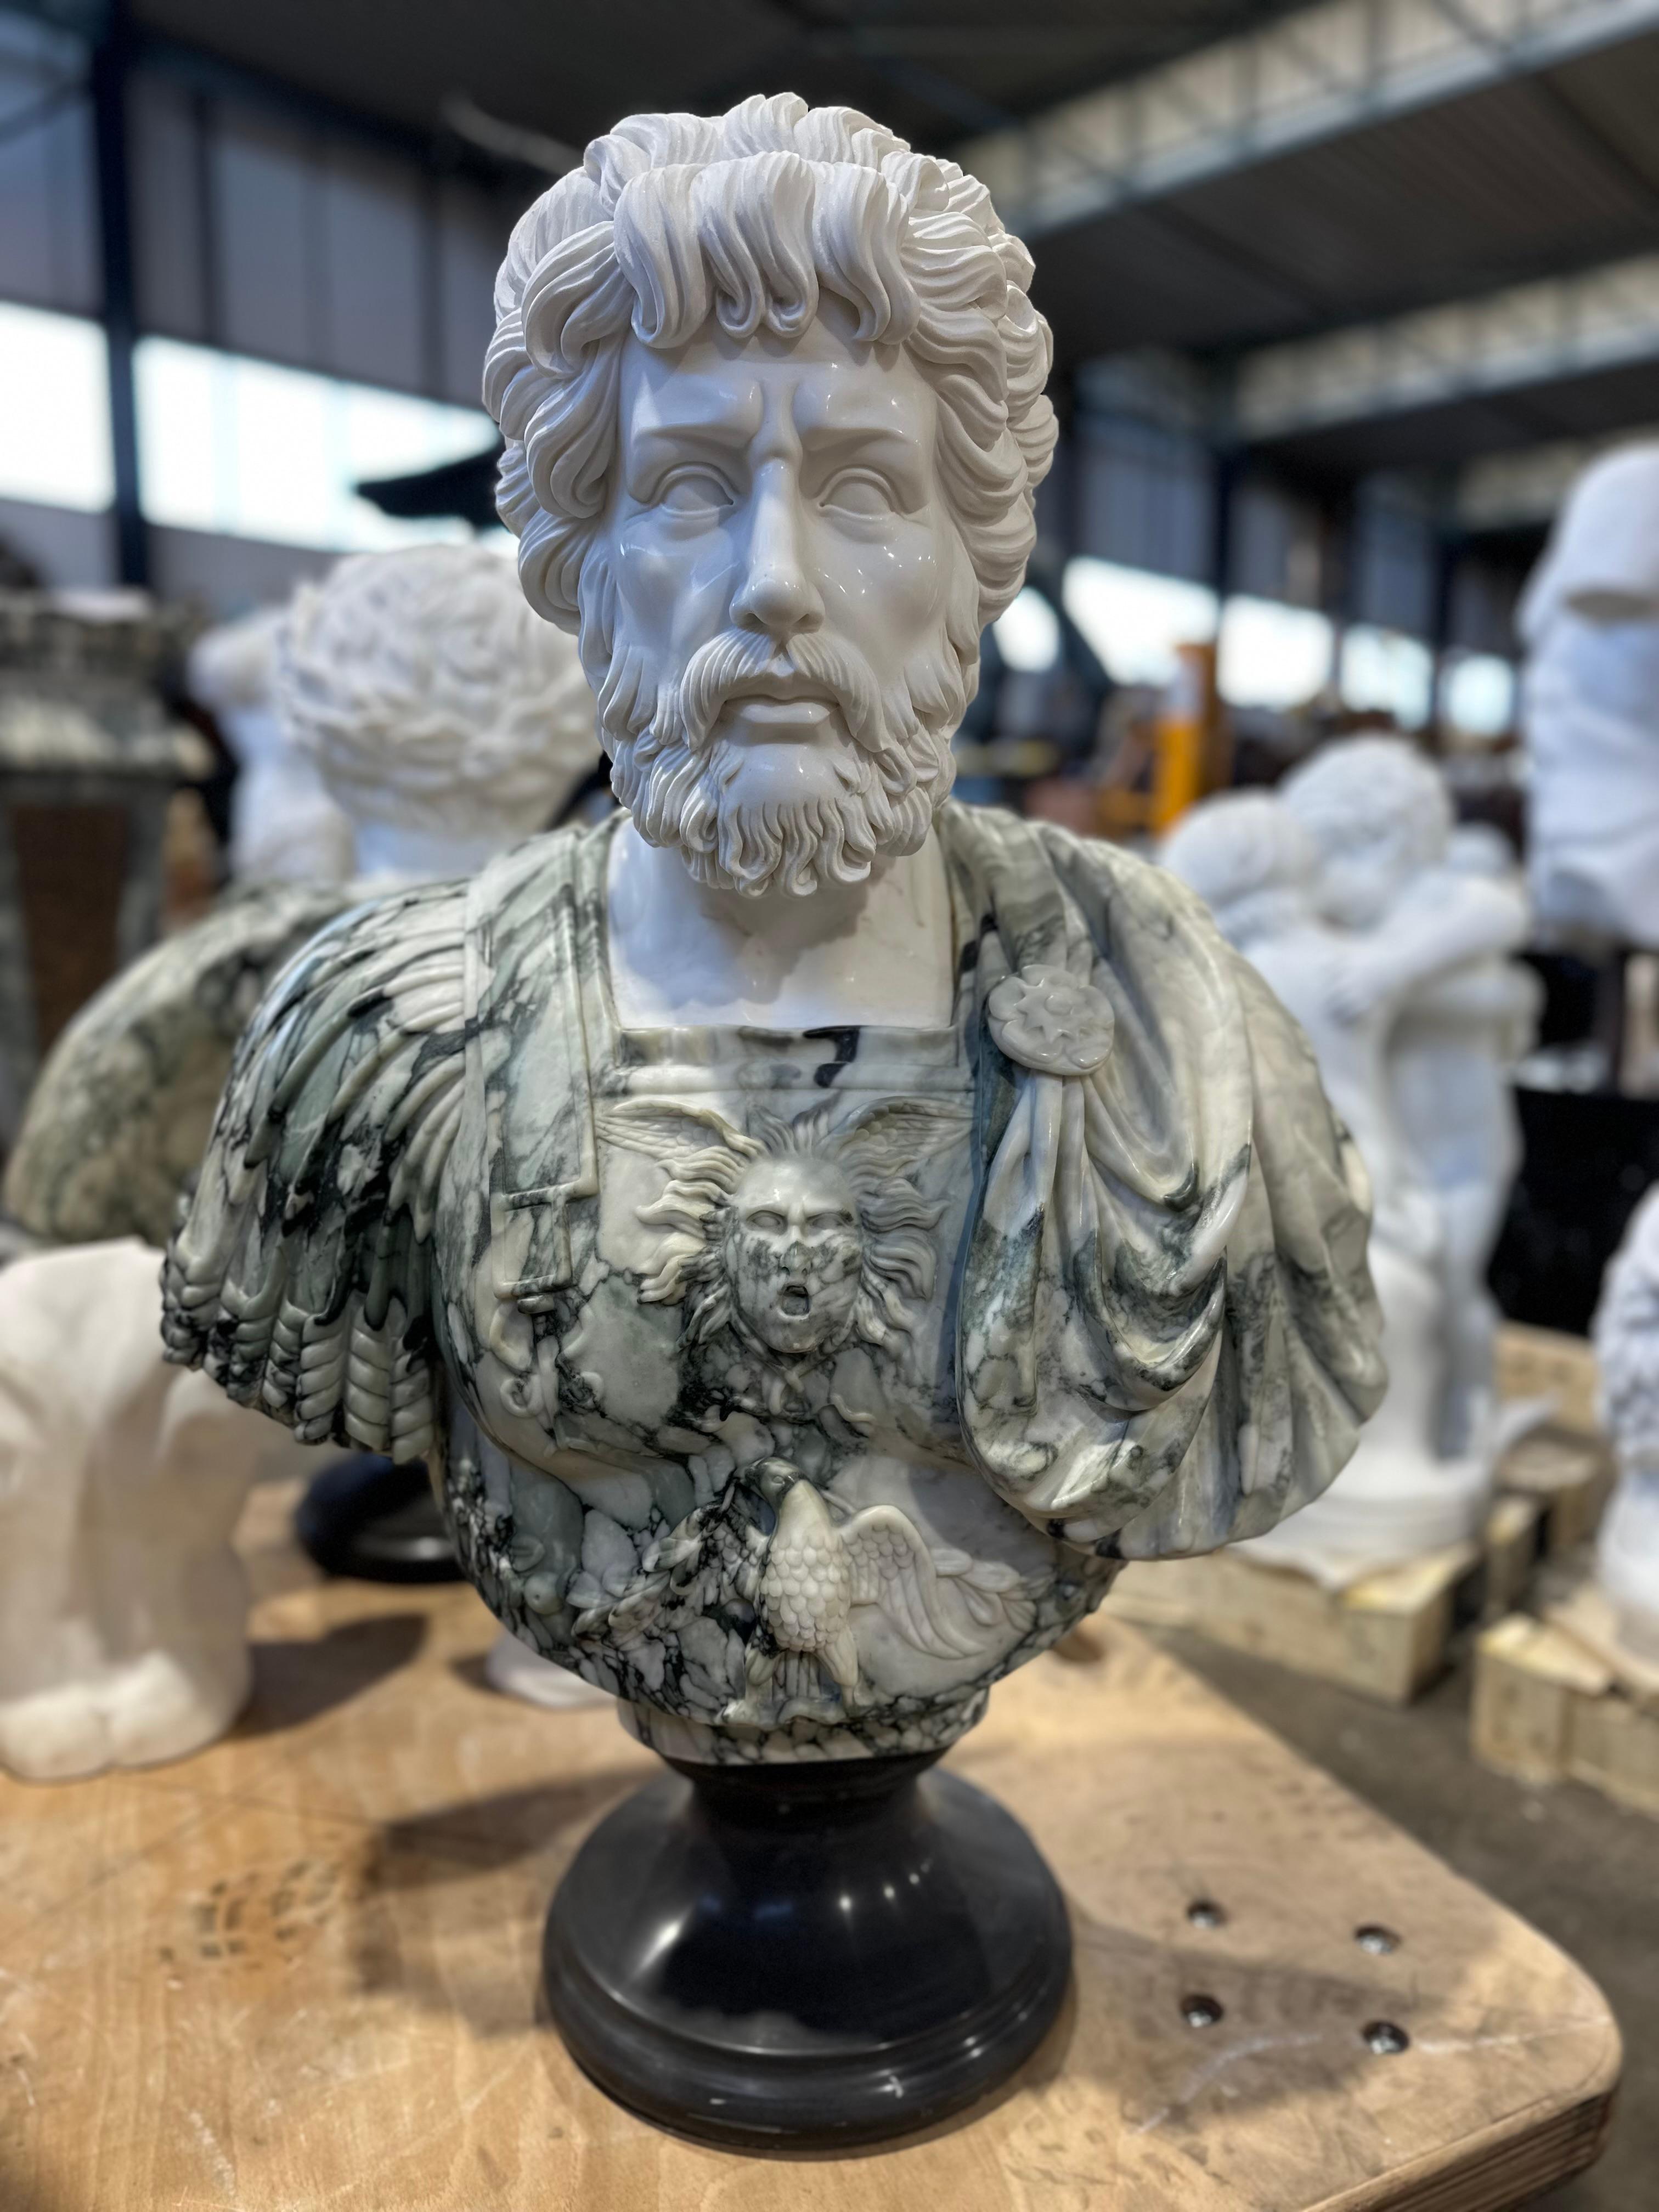 A handsome green and white marble male bust, on a black marble stand. A intricately detailed and imposing male marble bust with elaborate carvings to the breastplate showing a eagle and winged miniature face possibly Ares God of War. The males